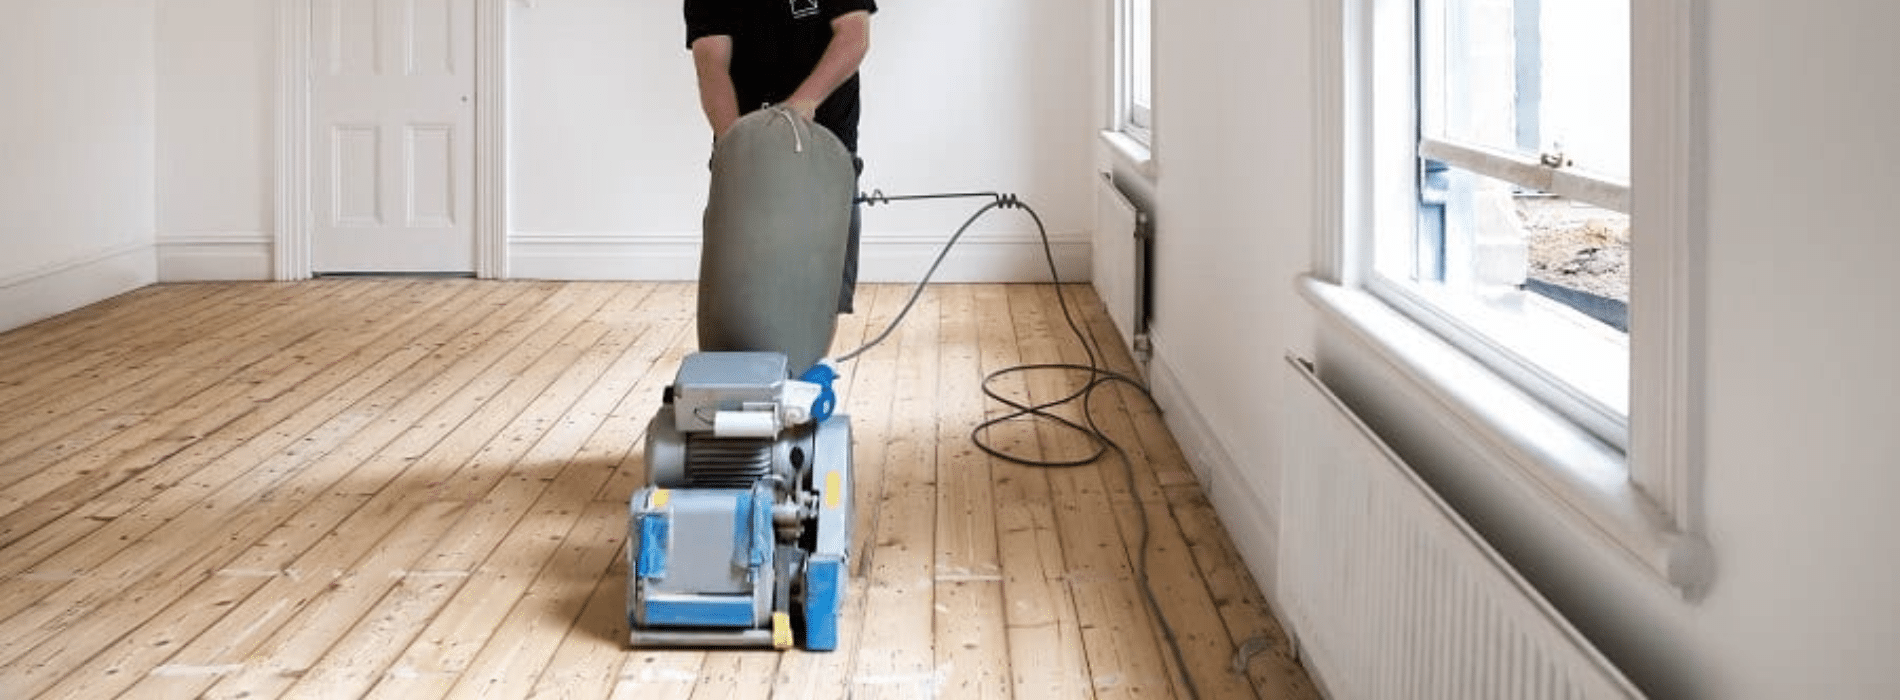 Mr Sander® are using a Bona Scorpion drum sander with a dimension of 200 mm, 1.5 kW power, and 240 V voltage in Chessington, KT9. The sander operates at a frequency of 50 Hz and is connected to a dust extraction system with a HEPA filter for a clean and efficient outcome.